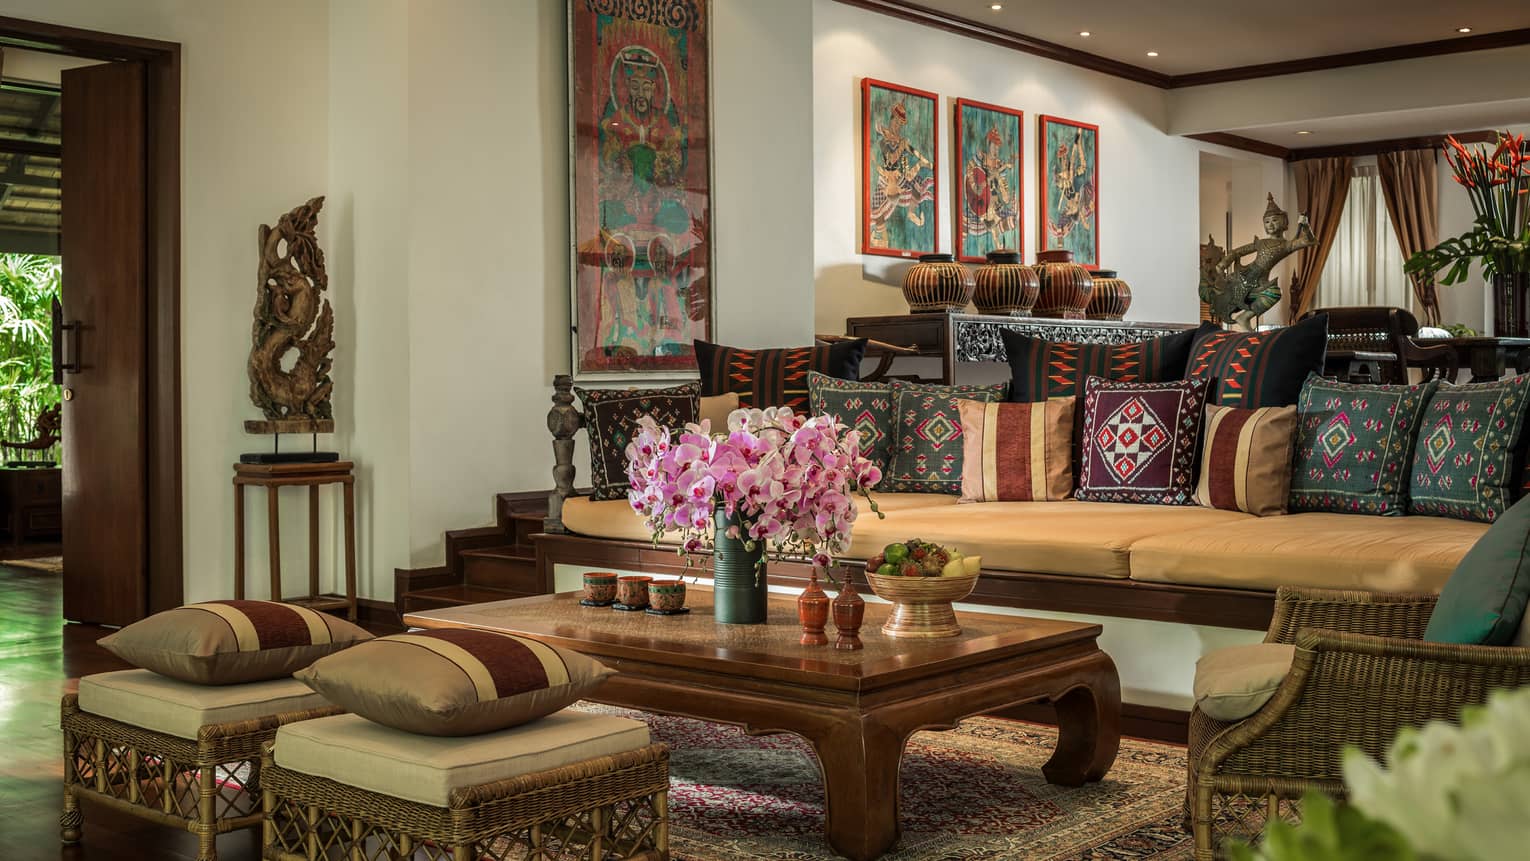 Residence living room with long sofa and two ottomans covered with Thailand textile pillows, wood table